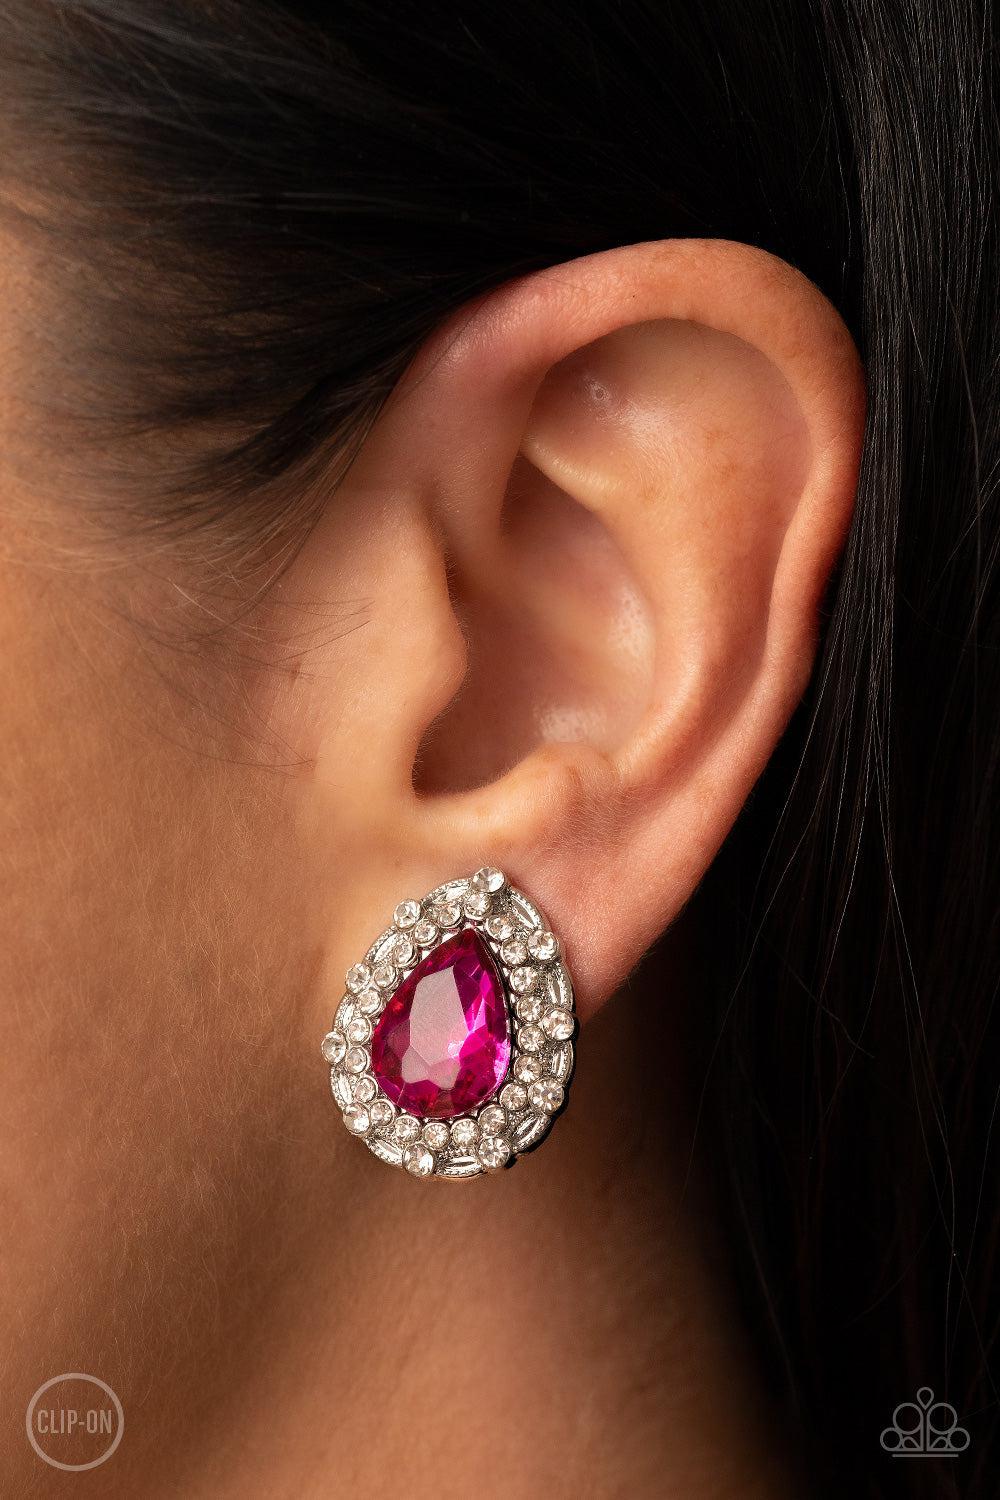 Haute Happy Hour Pink Rhinestone Clip-On Earrings - Paparazzi Accessories-on model - CarasShop.com - $5 Jewelry by Cara Jewels